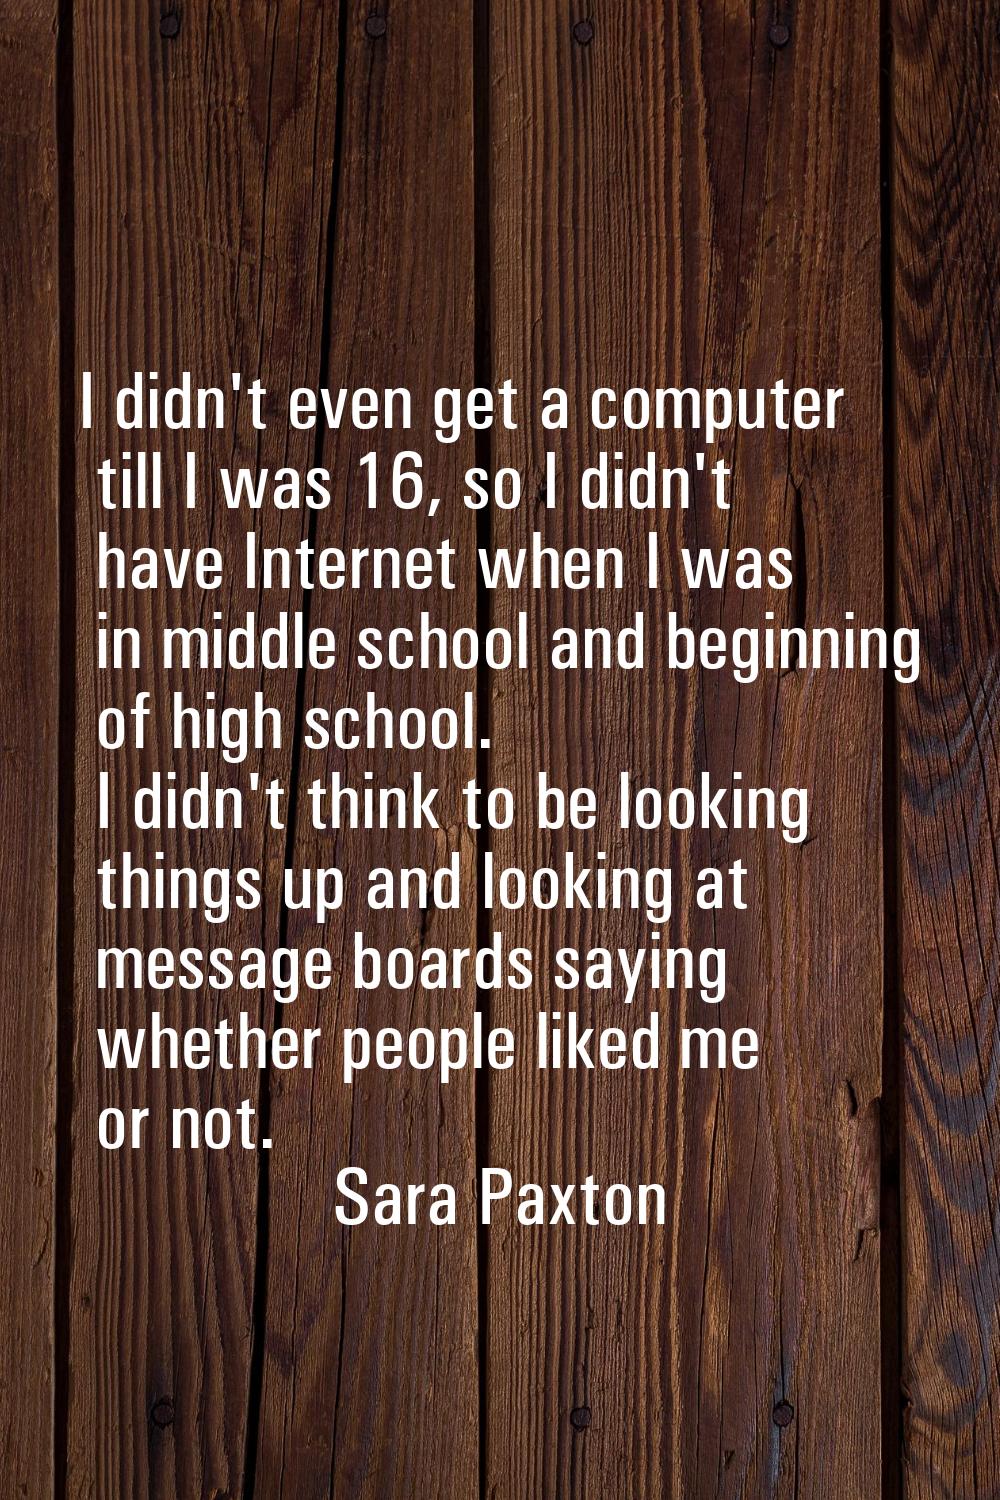 I didn't even get a computer till I was 16, so I didn't have Internet when I was in middle school a